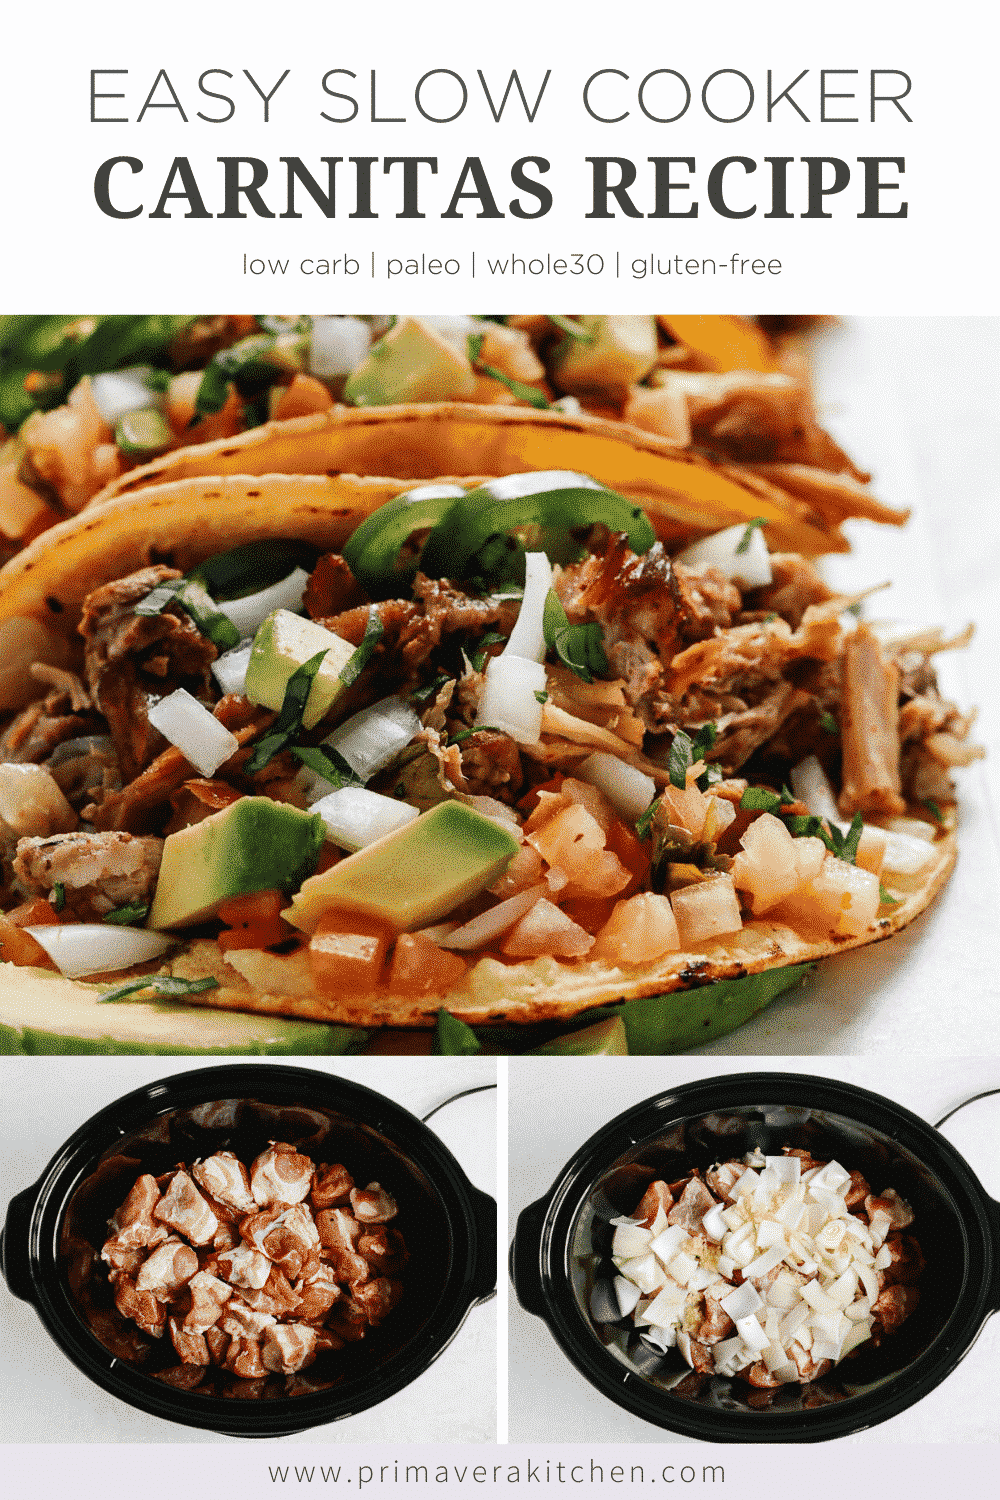 titled photo collage (and shown): Easy Slow Cooker Carnitas